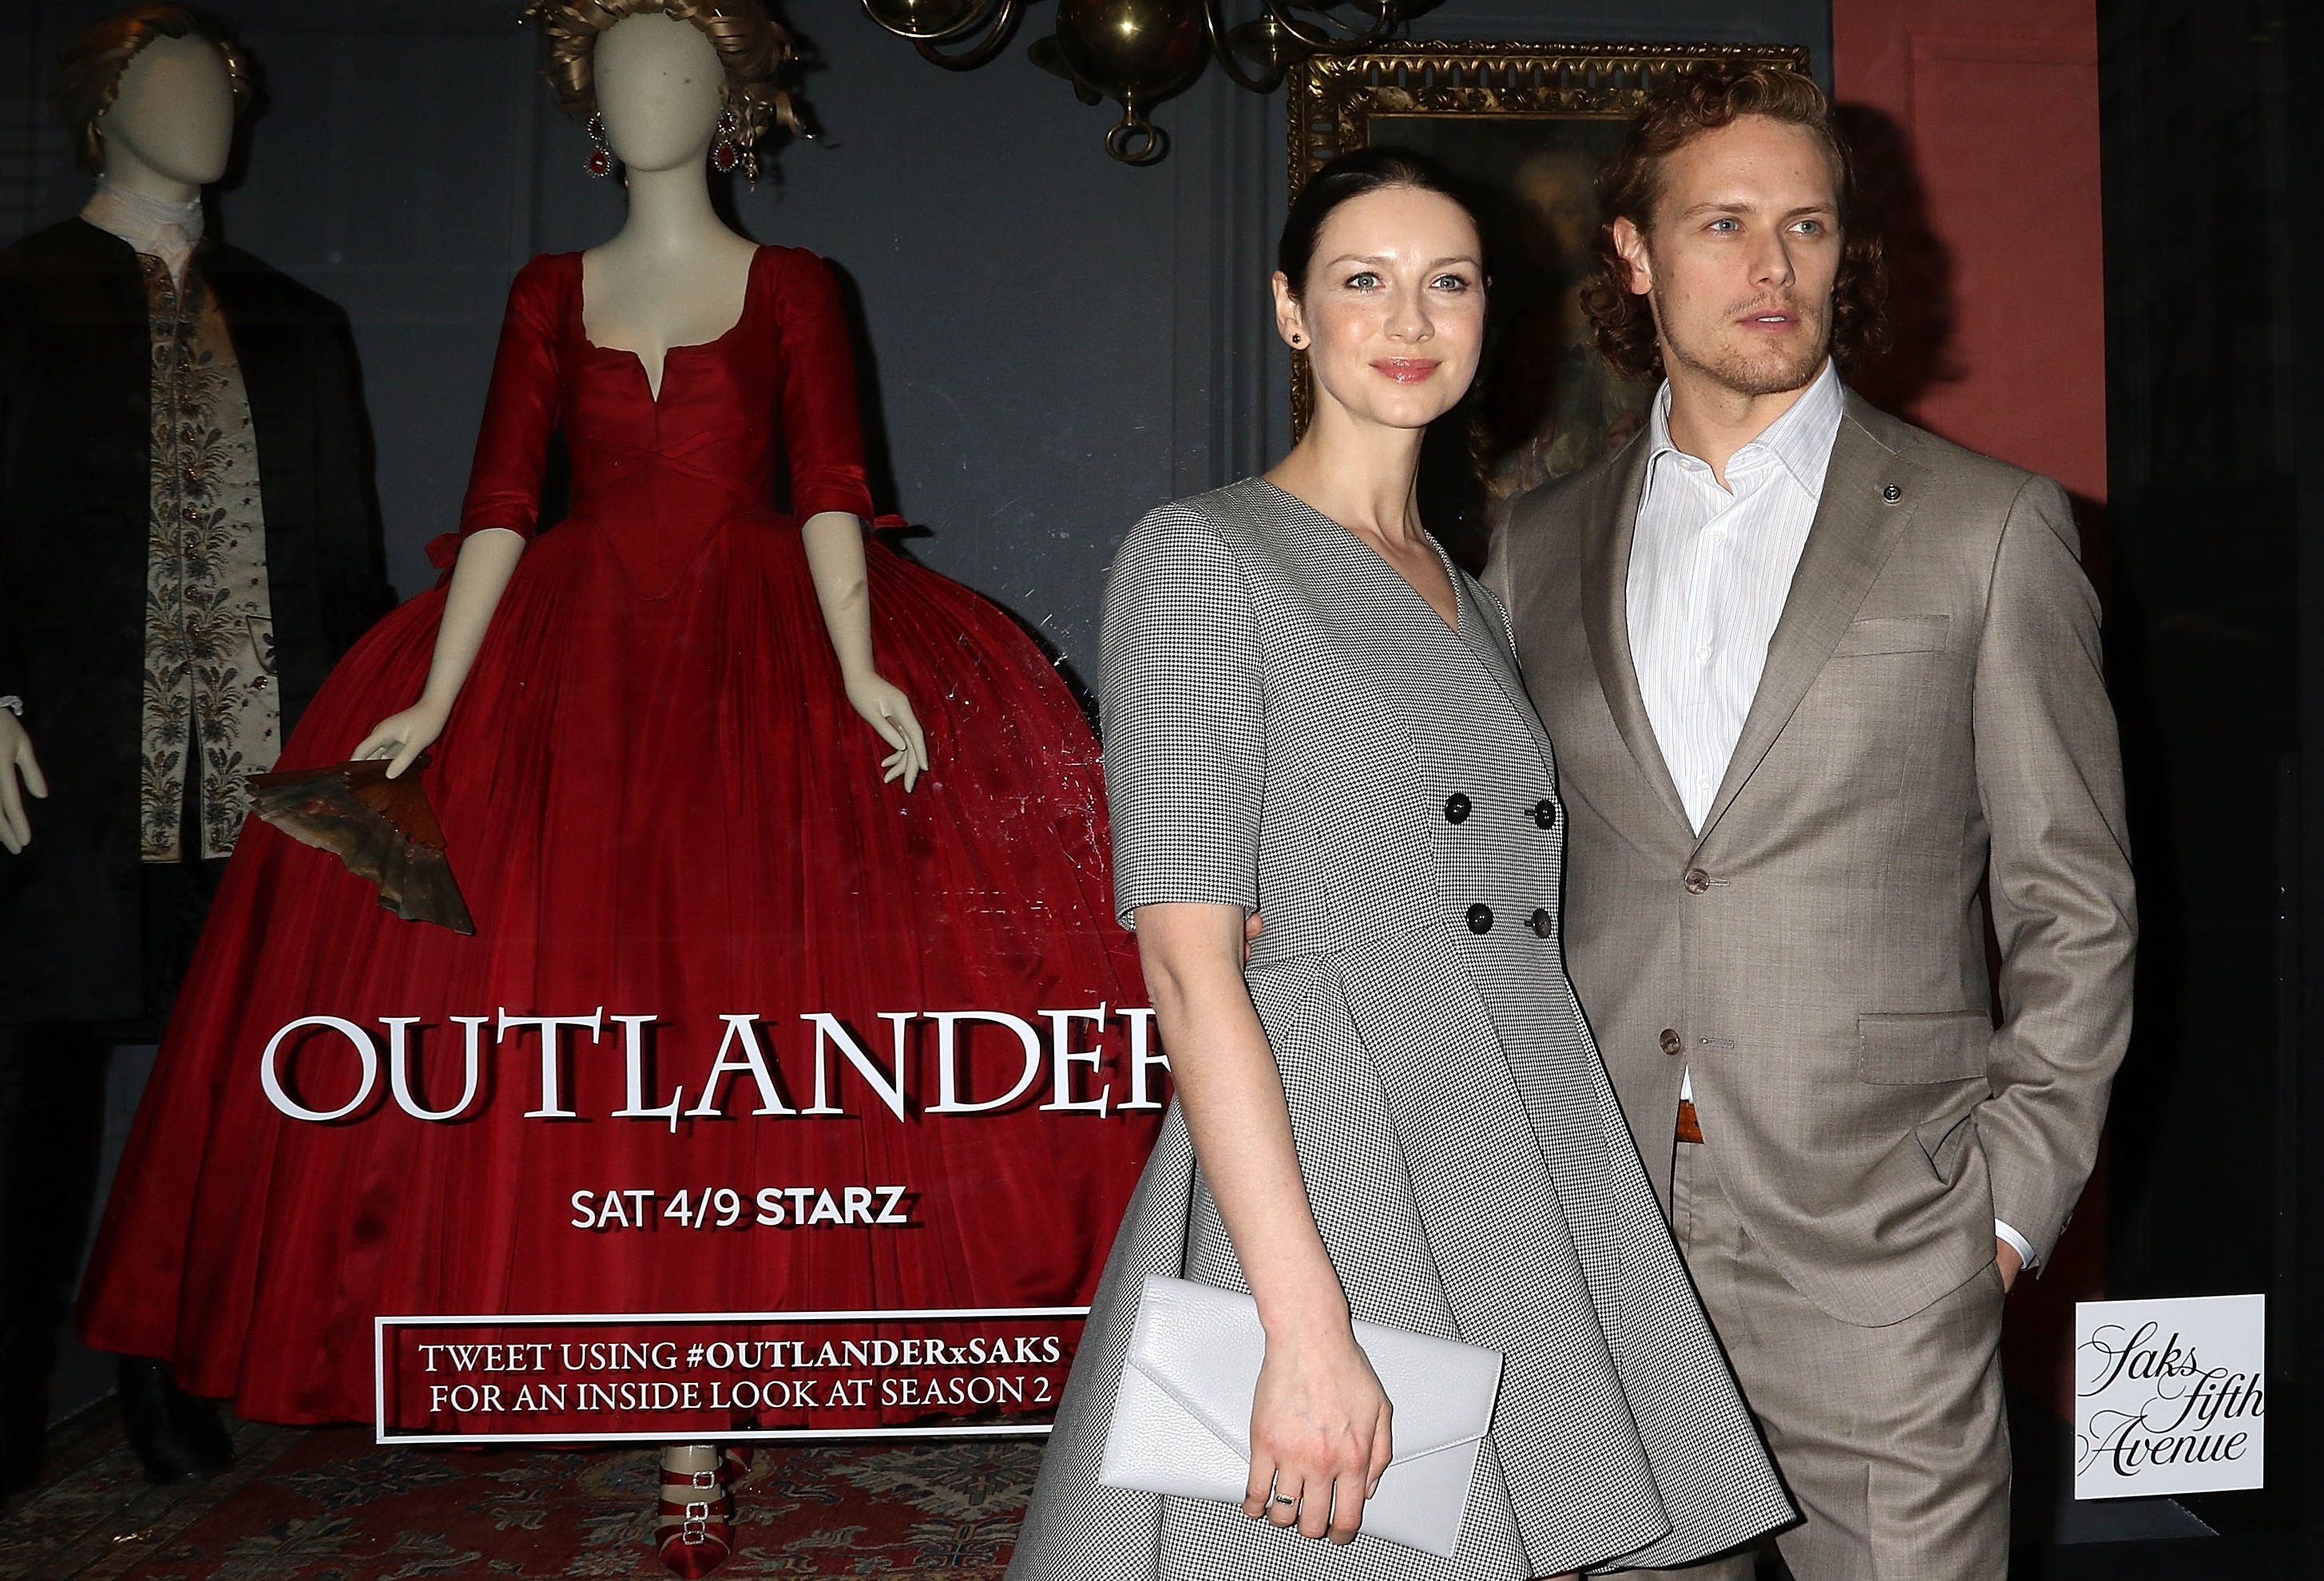 Caitriona Balfe and Sam Heughan promote the new series of Outlander in New York (Laura Cavanaugh/Getty Images)